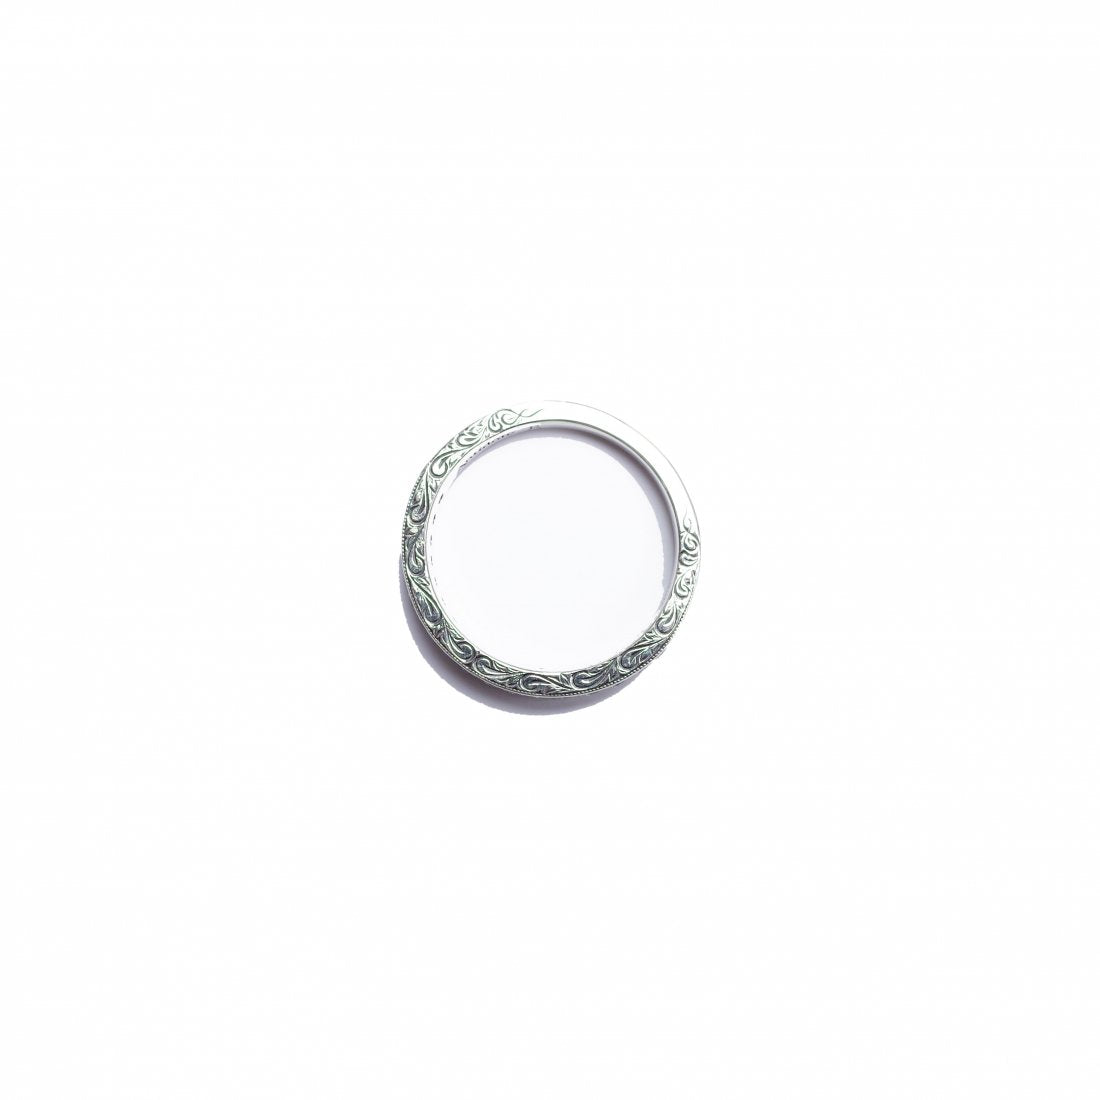 ANTIDOTE BUYERS CLUB / ENGRAVED PAVE RING